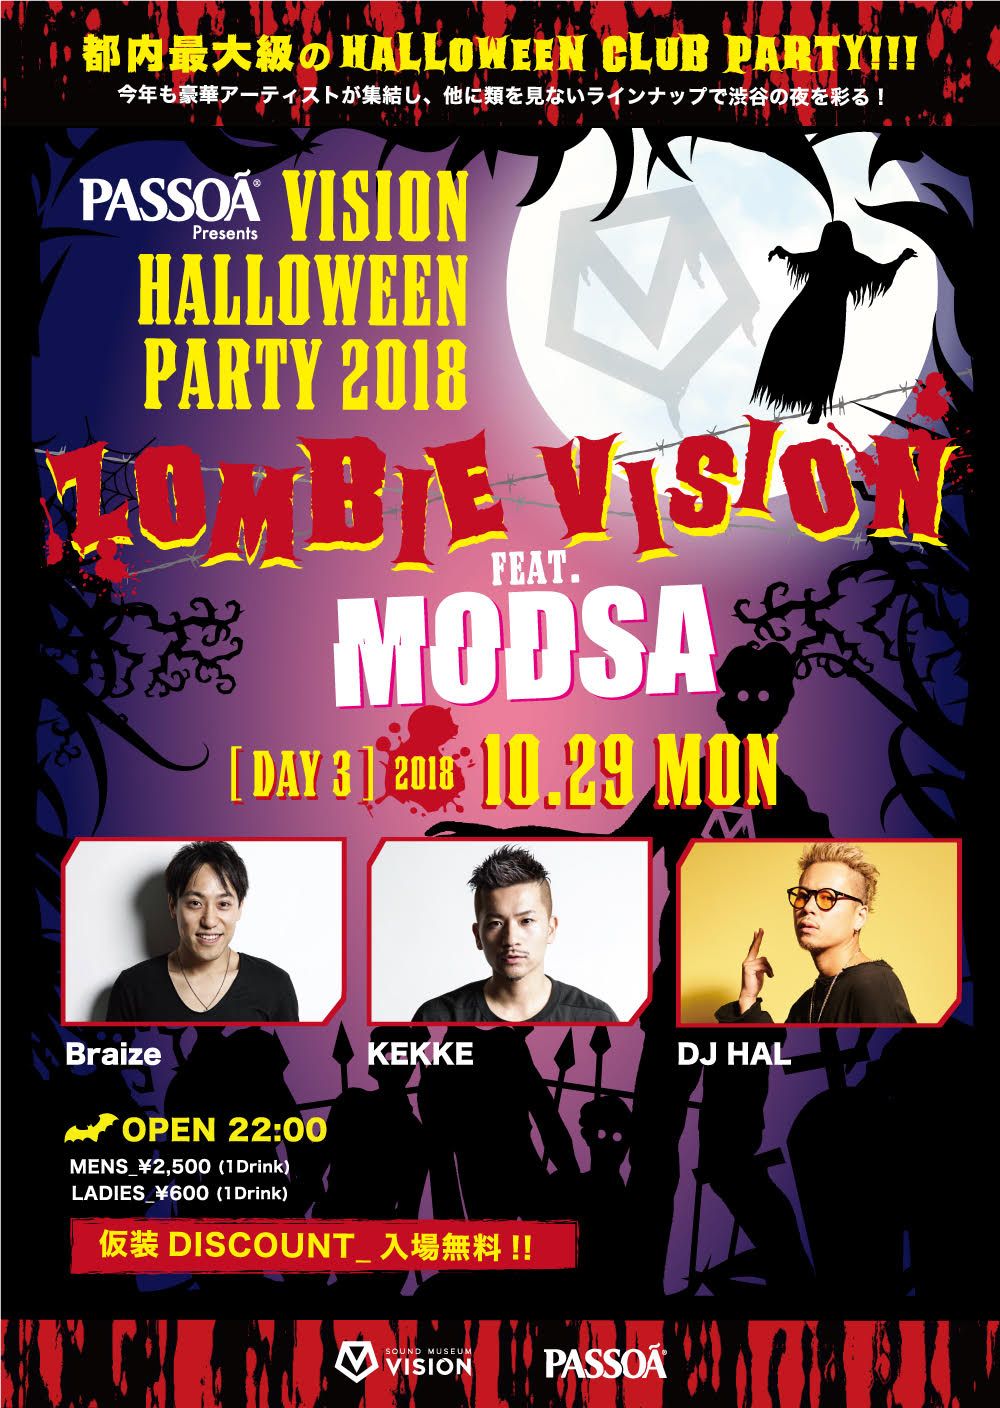 PASSOA Presents VISION HALLOWEEN PARTY 2018 “ZOMBIE VISION” DAY3 「MODSA」